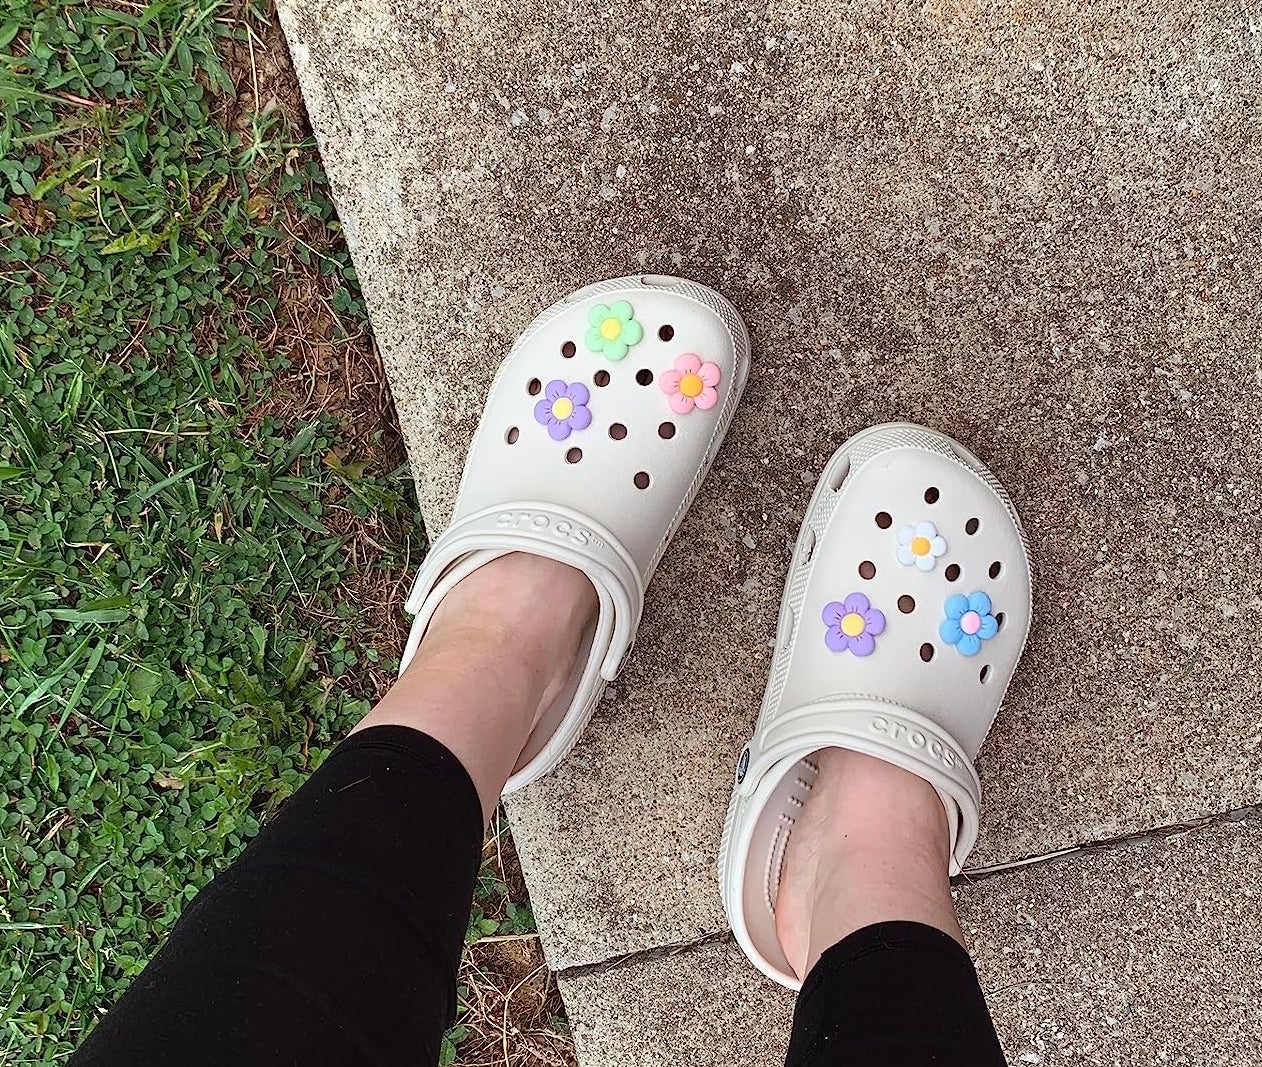 reviewer wearing white crocs with colorful flower charms on them